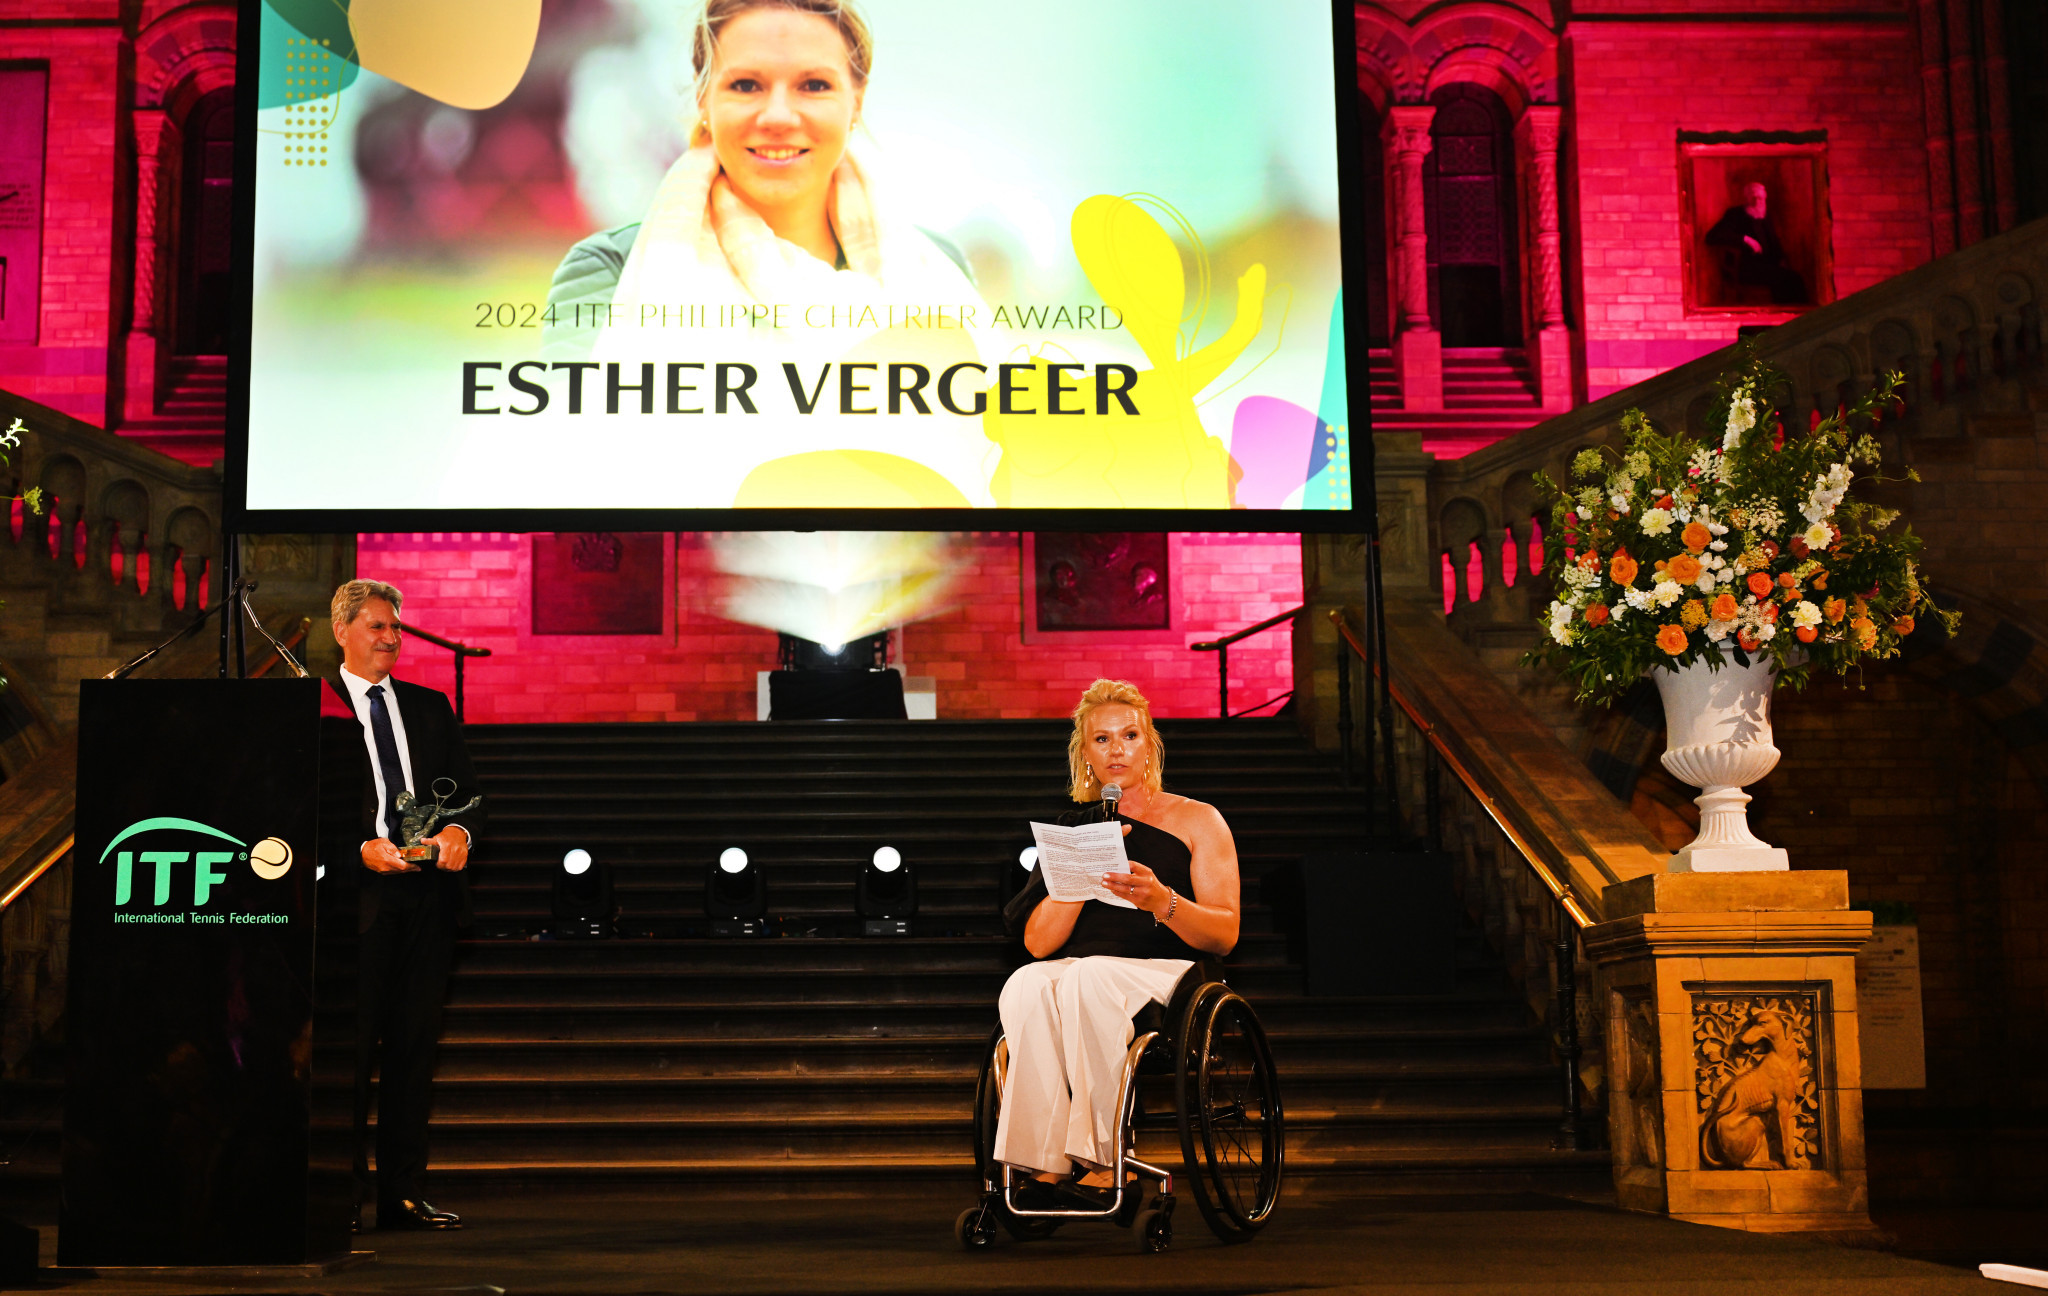 Esther Vergeer says she will always work hard to make sure that everyone – regardless of age, gender, or disability – can enjoy tennis for years to come. ITF